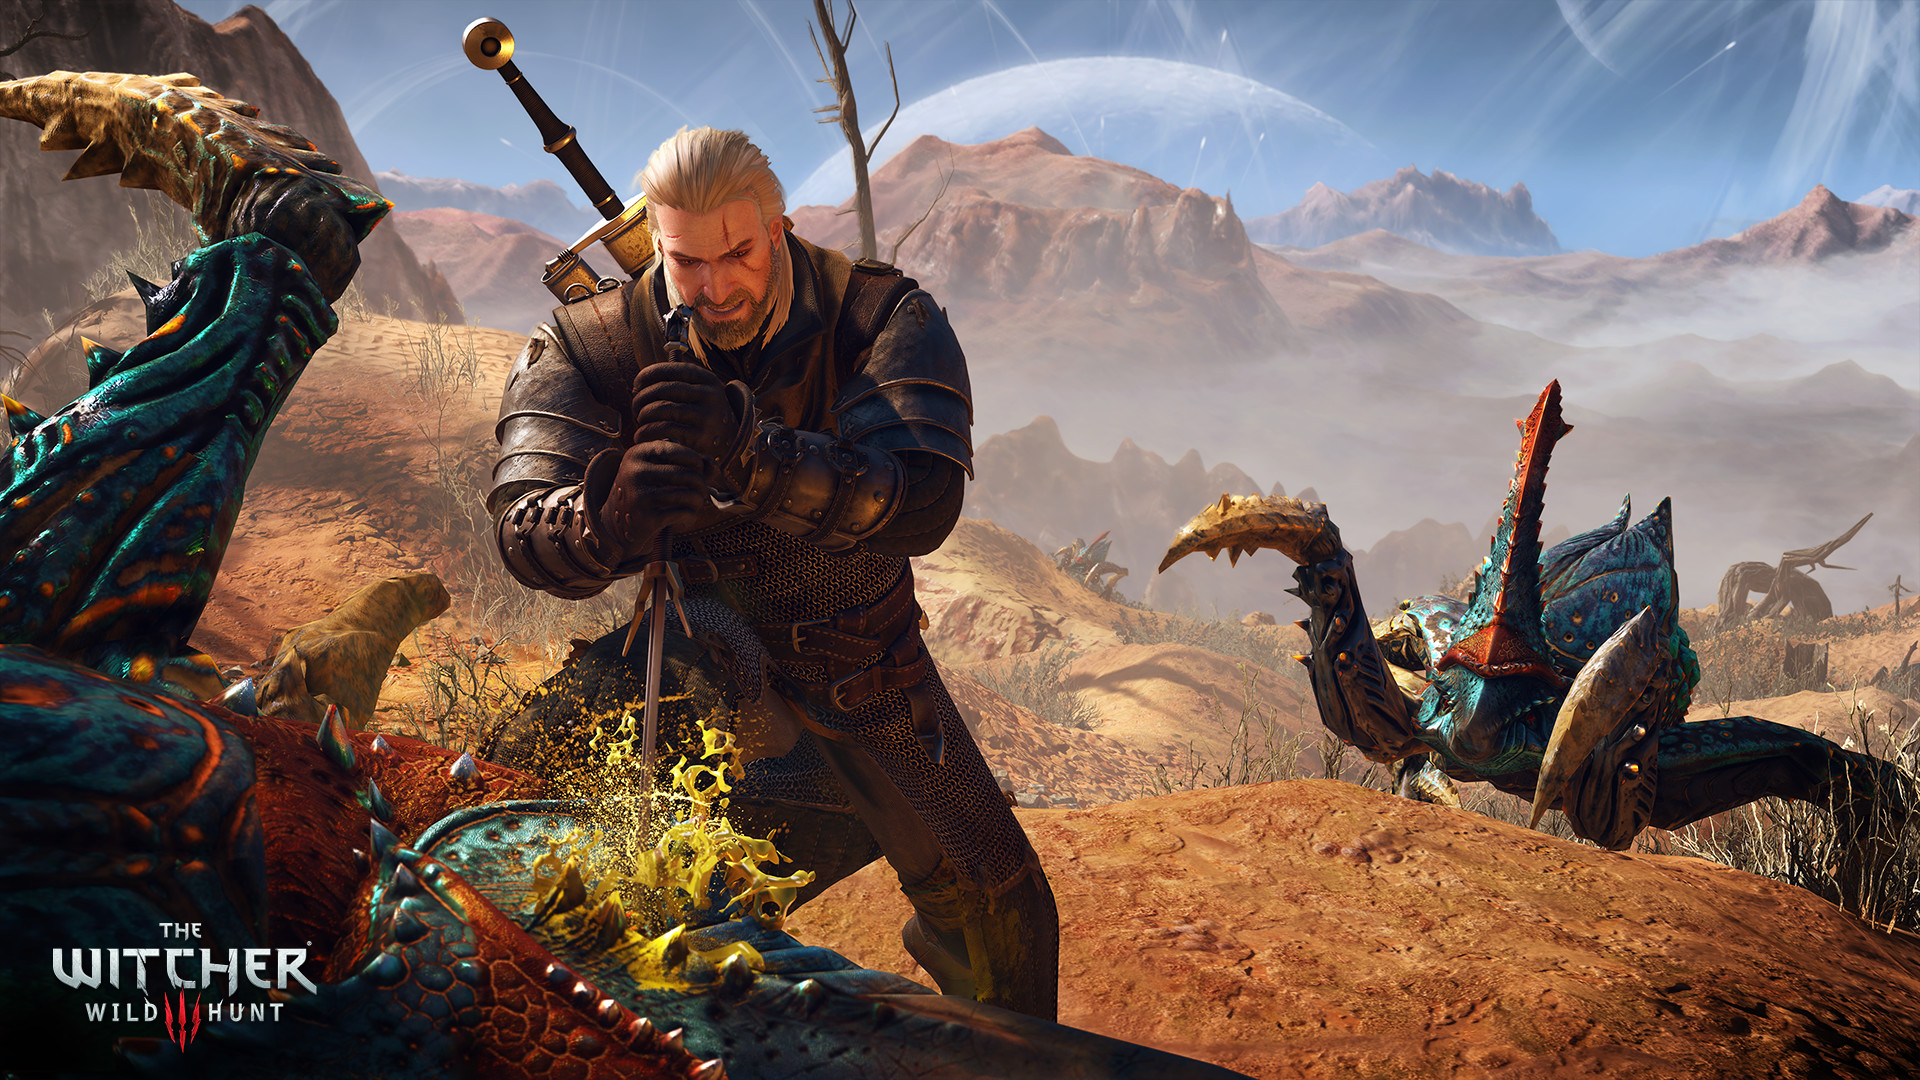 The Witcher 3: Wild Hunt - Game of the Year Edition on Steam